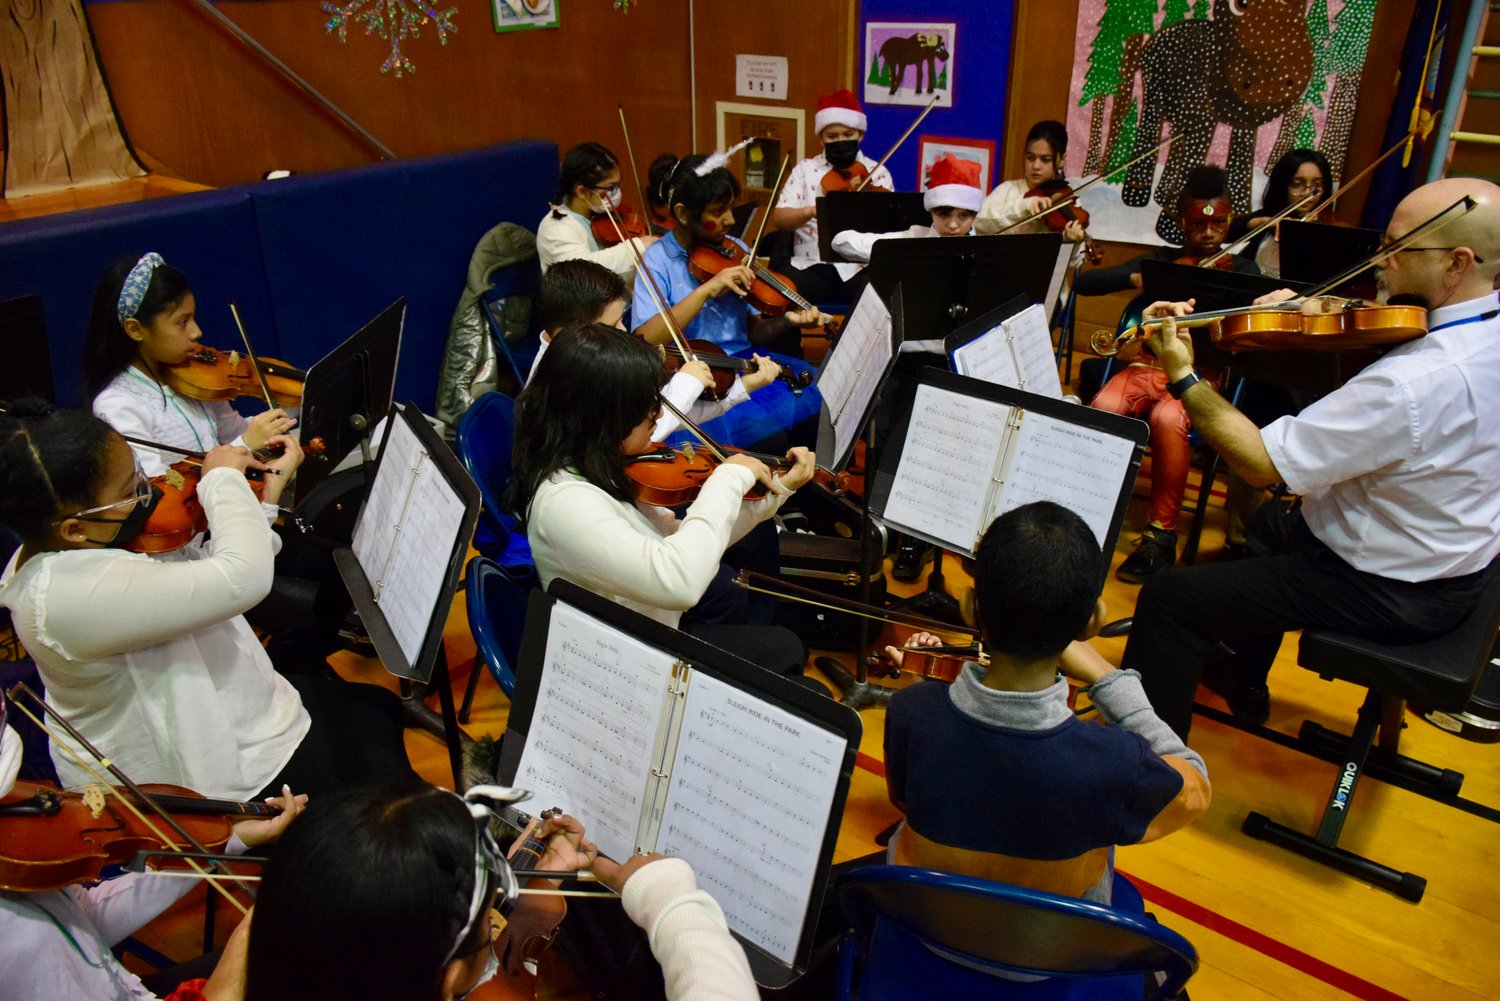 Stewart Manor School’s orchestra performed during the morning show on Dec. 15.